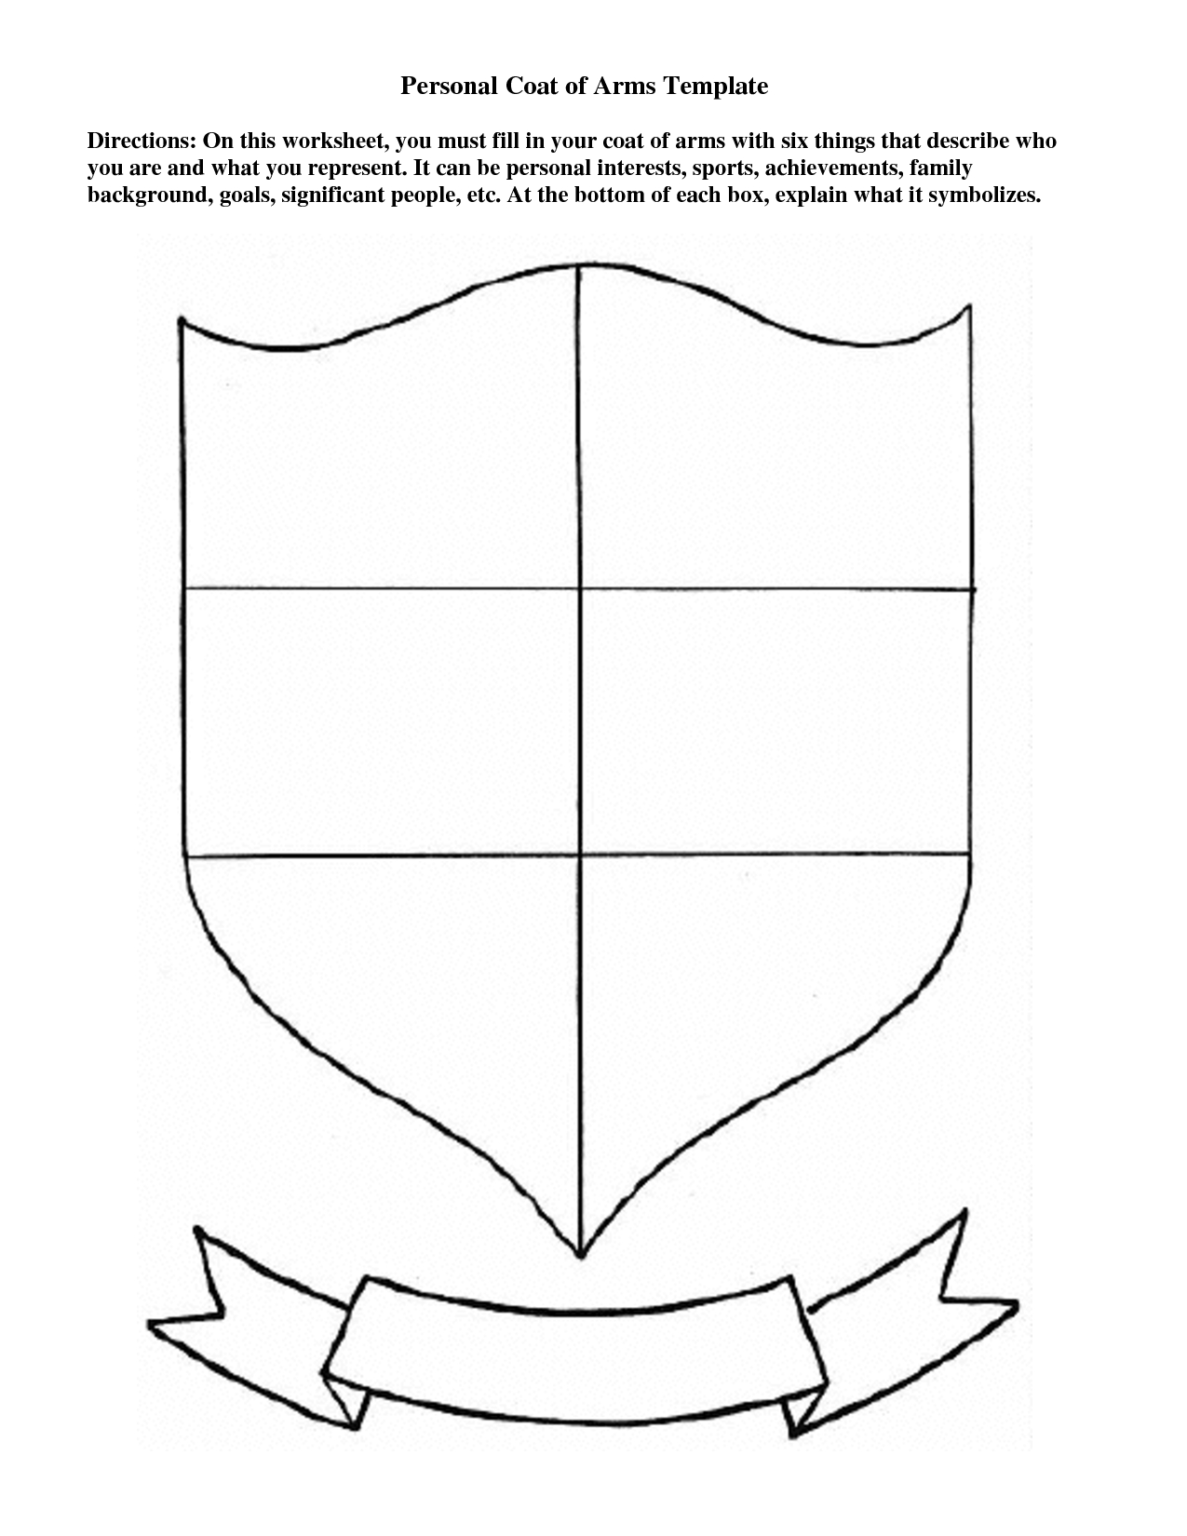 personal-coat-of-arms-template-coat-of-arms-templates-pertaining-to-blank-shield-template